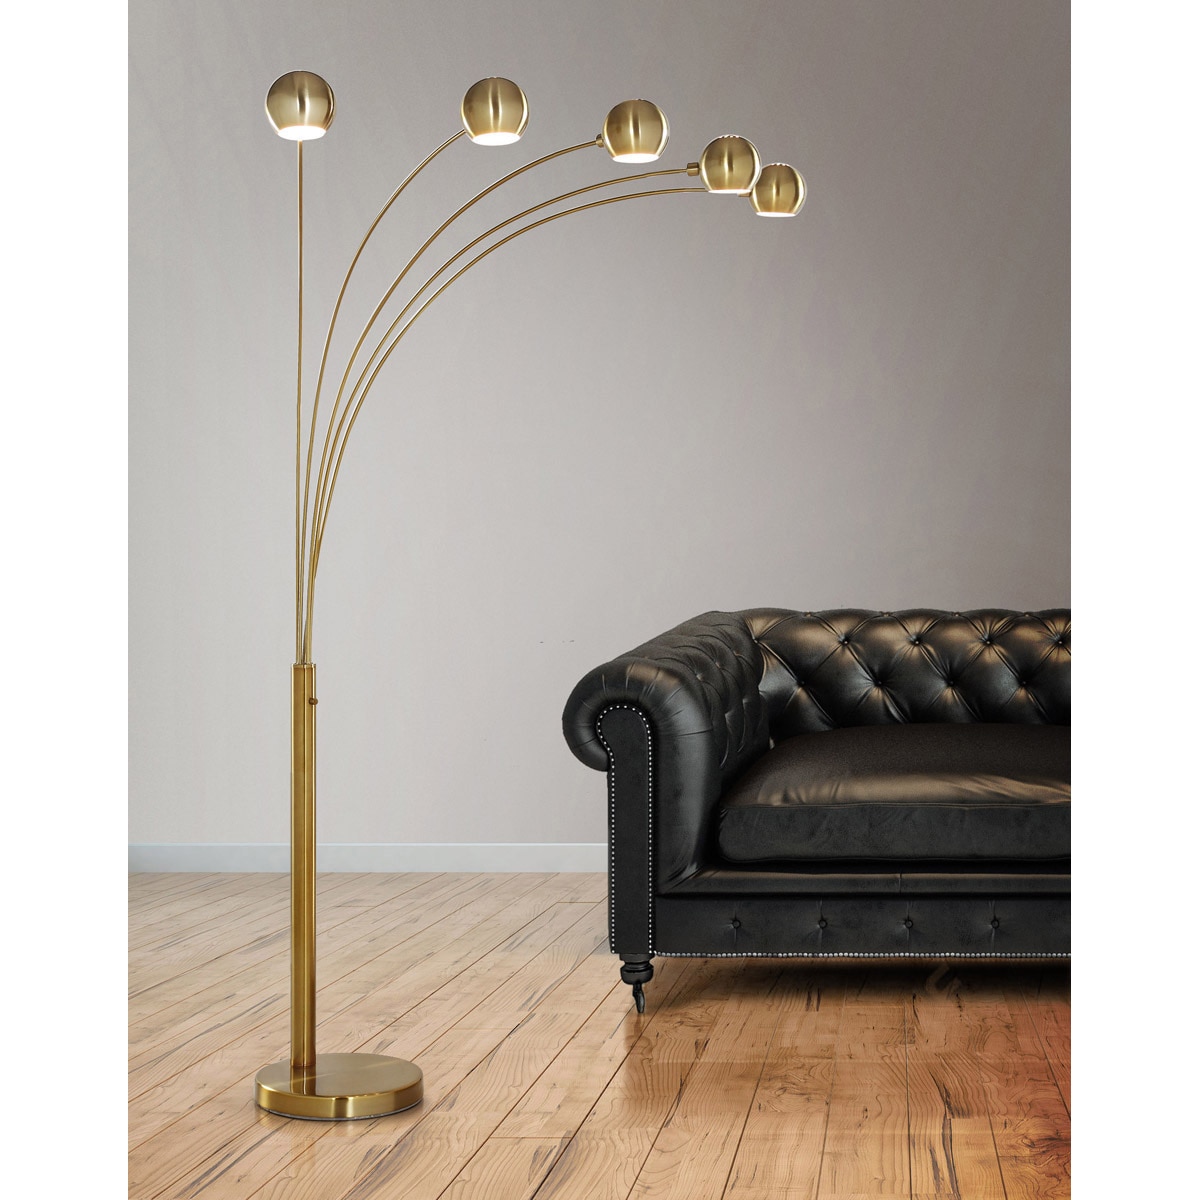 Orbs 5-light Dimmable Arch Floor Lamp - Antique Brass - On Sale